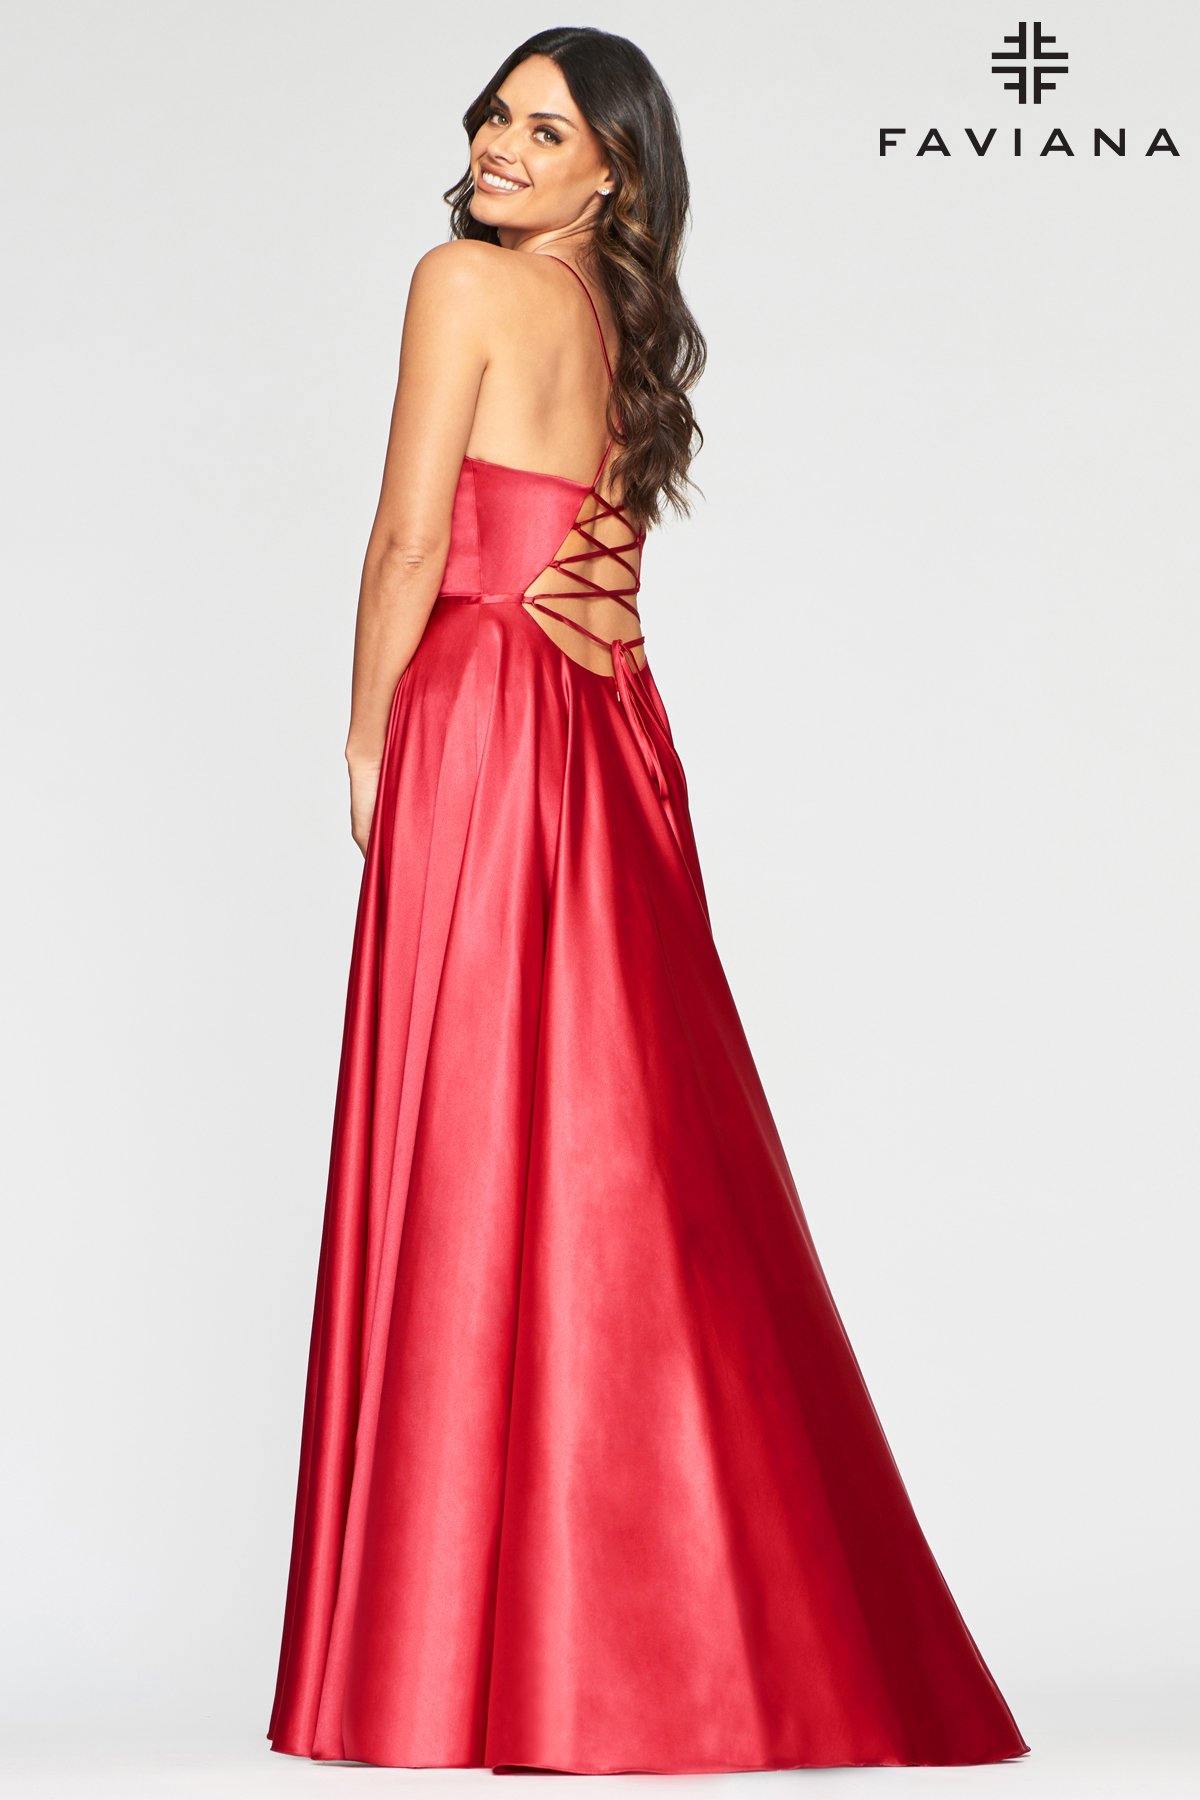 Faviana S10460 Long Formal Evening Prom Dress for $298.0 – The Dress Outlet